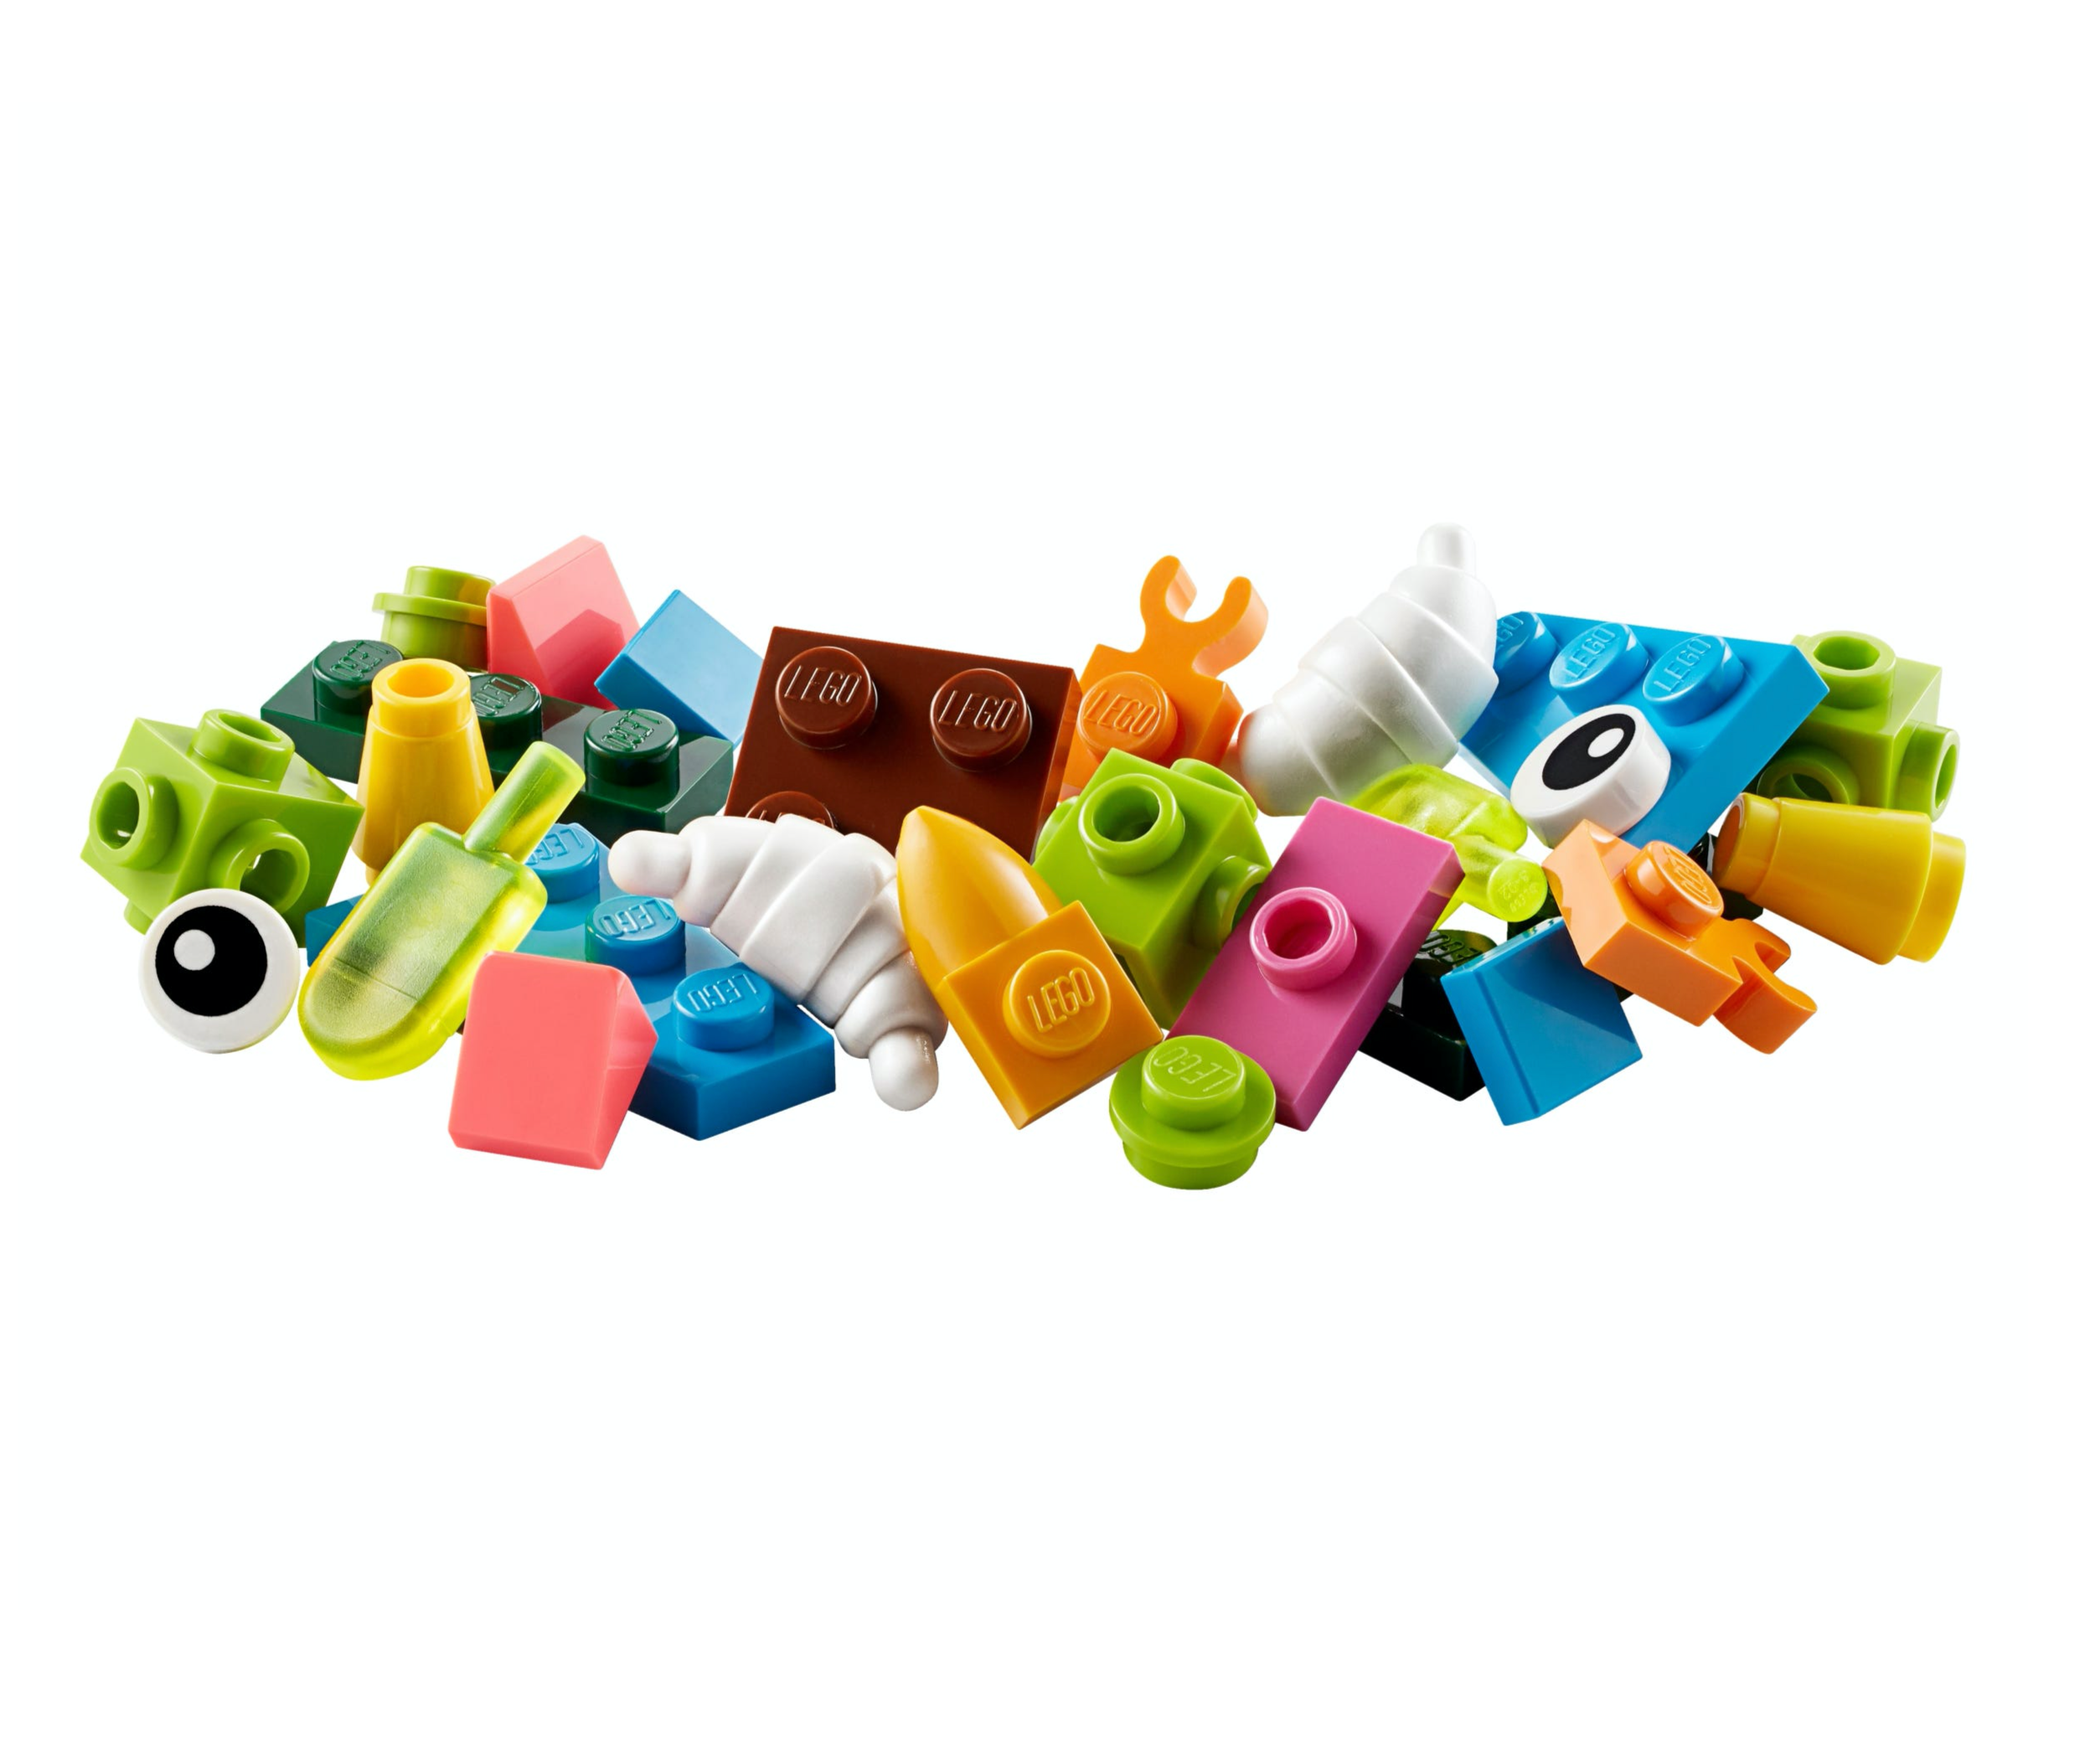 Polybag 30548 LEGO Build Your Own Birds - Make It Yours